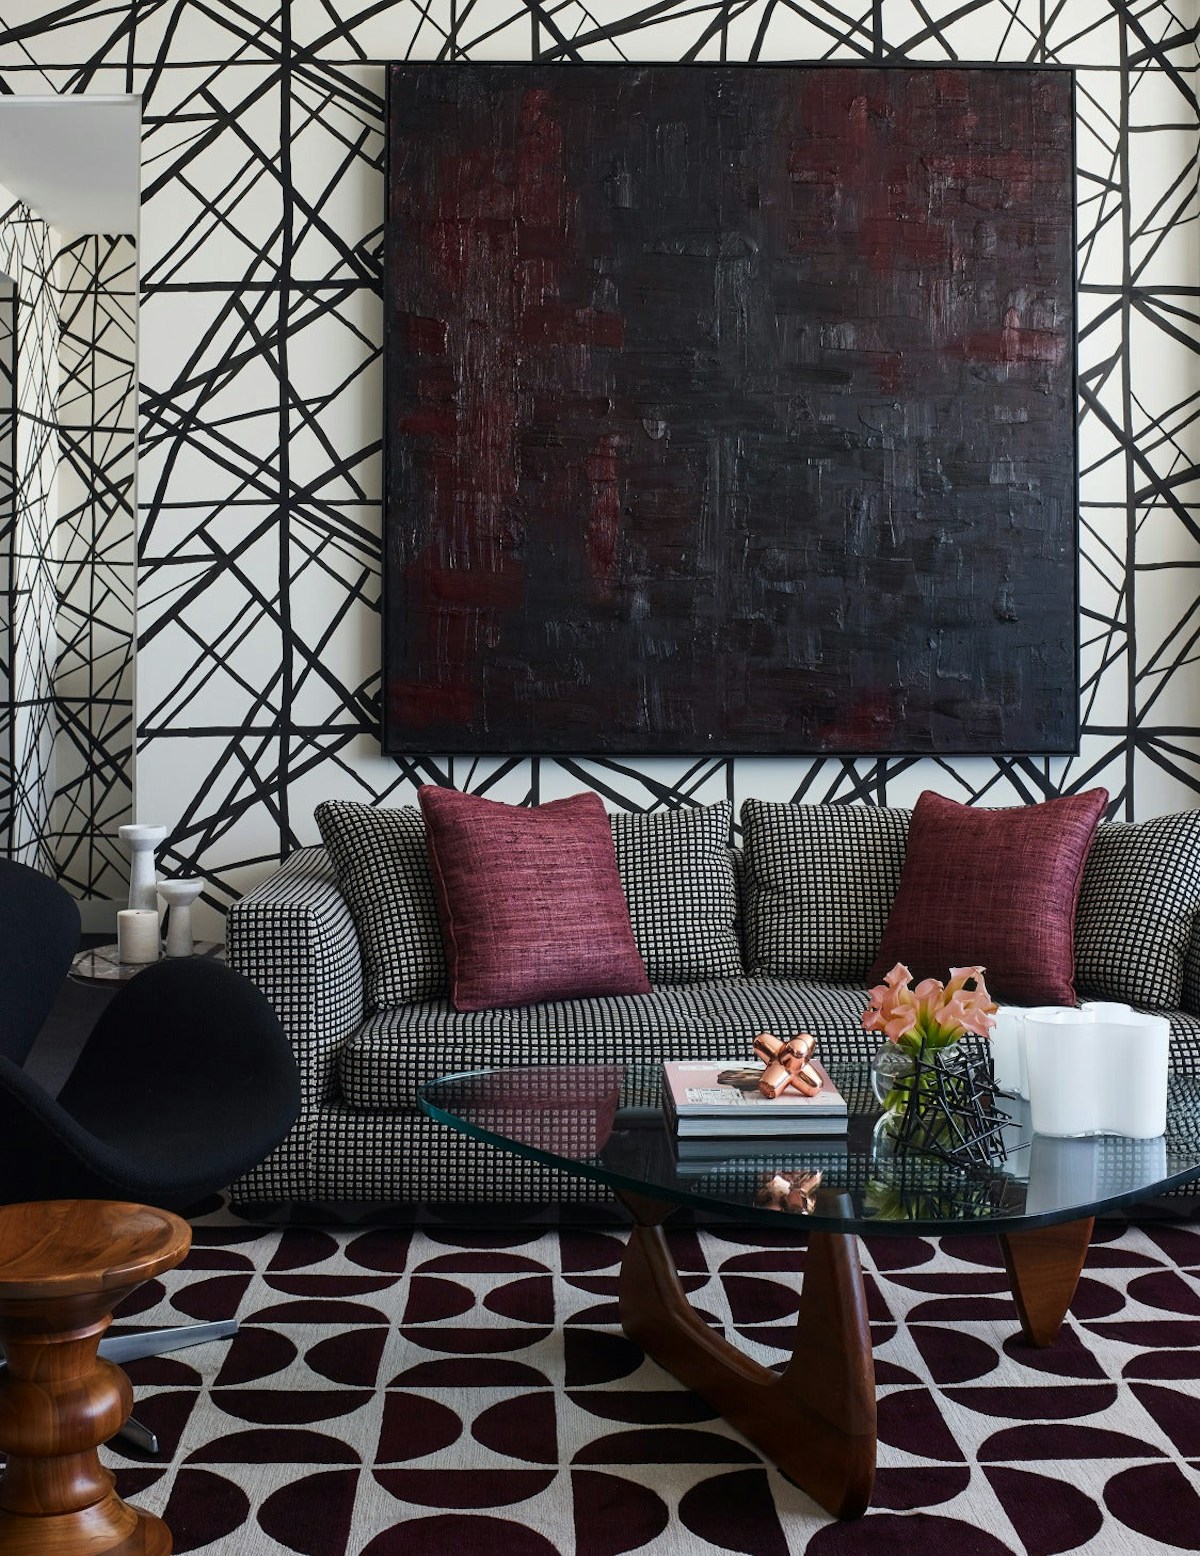 Statement Wallpaper - 7 Ways To Make a Statement In Your Living Room - LuxDeco.com Style Guide